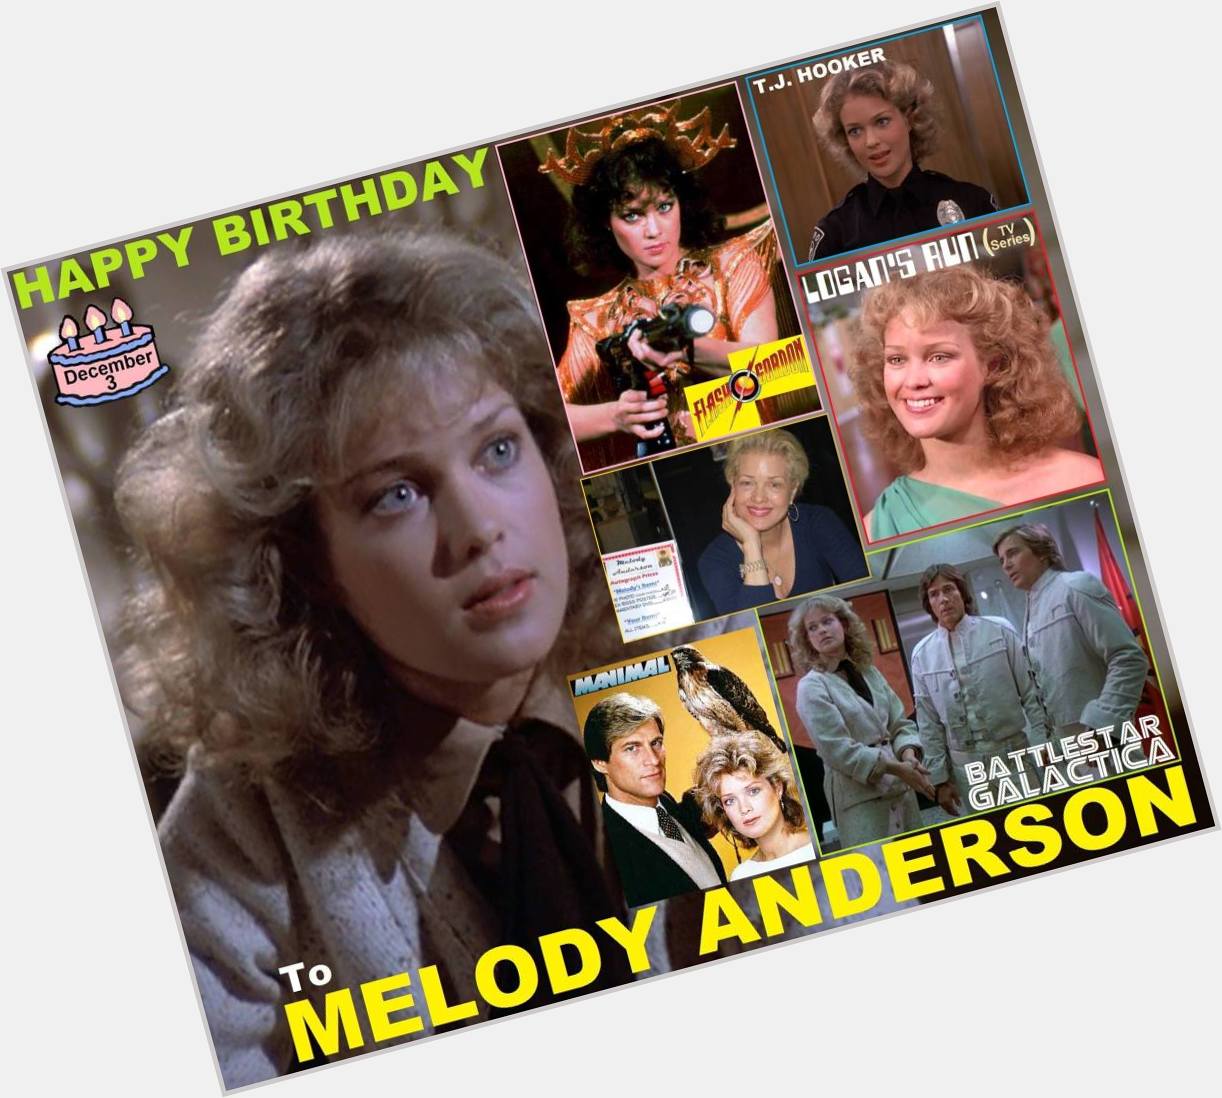 Happy birthday to Melody Anderson who was born December 3, 1955.  